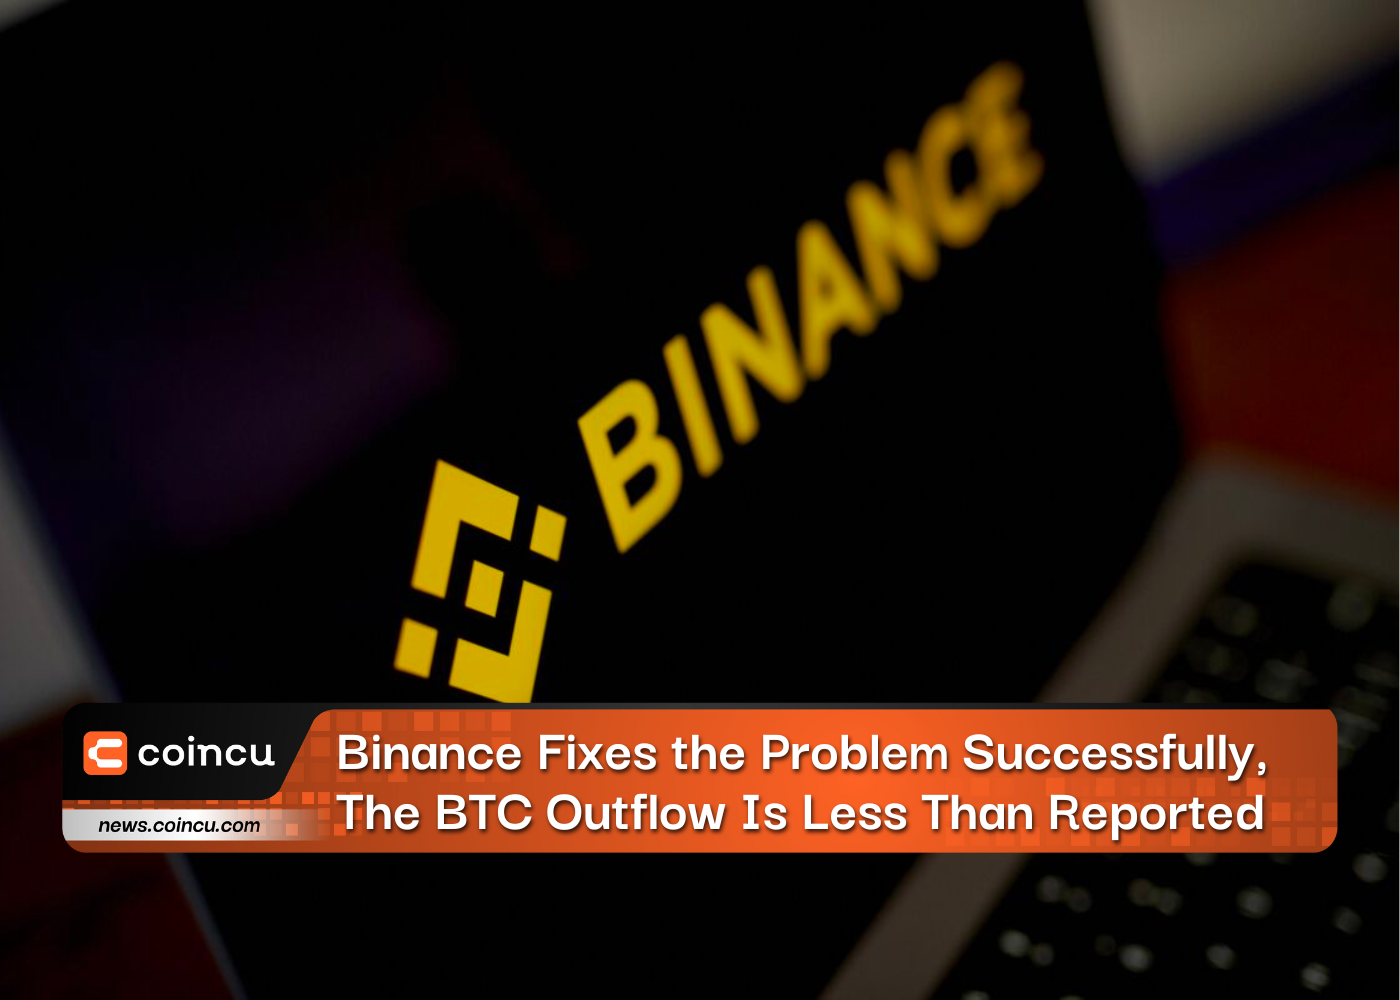 Binance Fixes the Problem Successfully, The BTC Outflow Is Less Than Reported